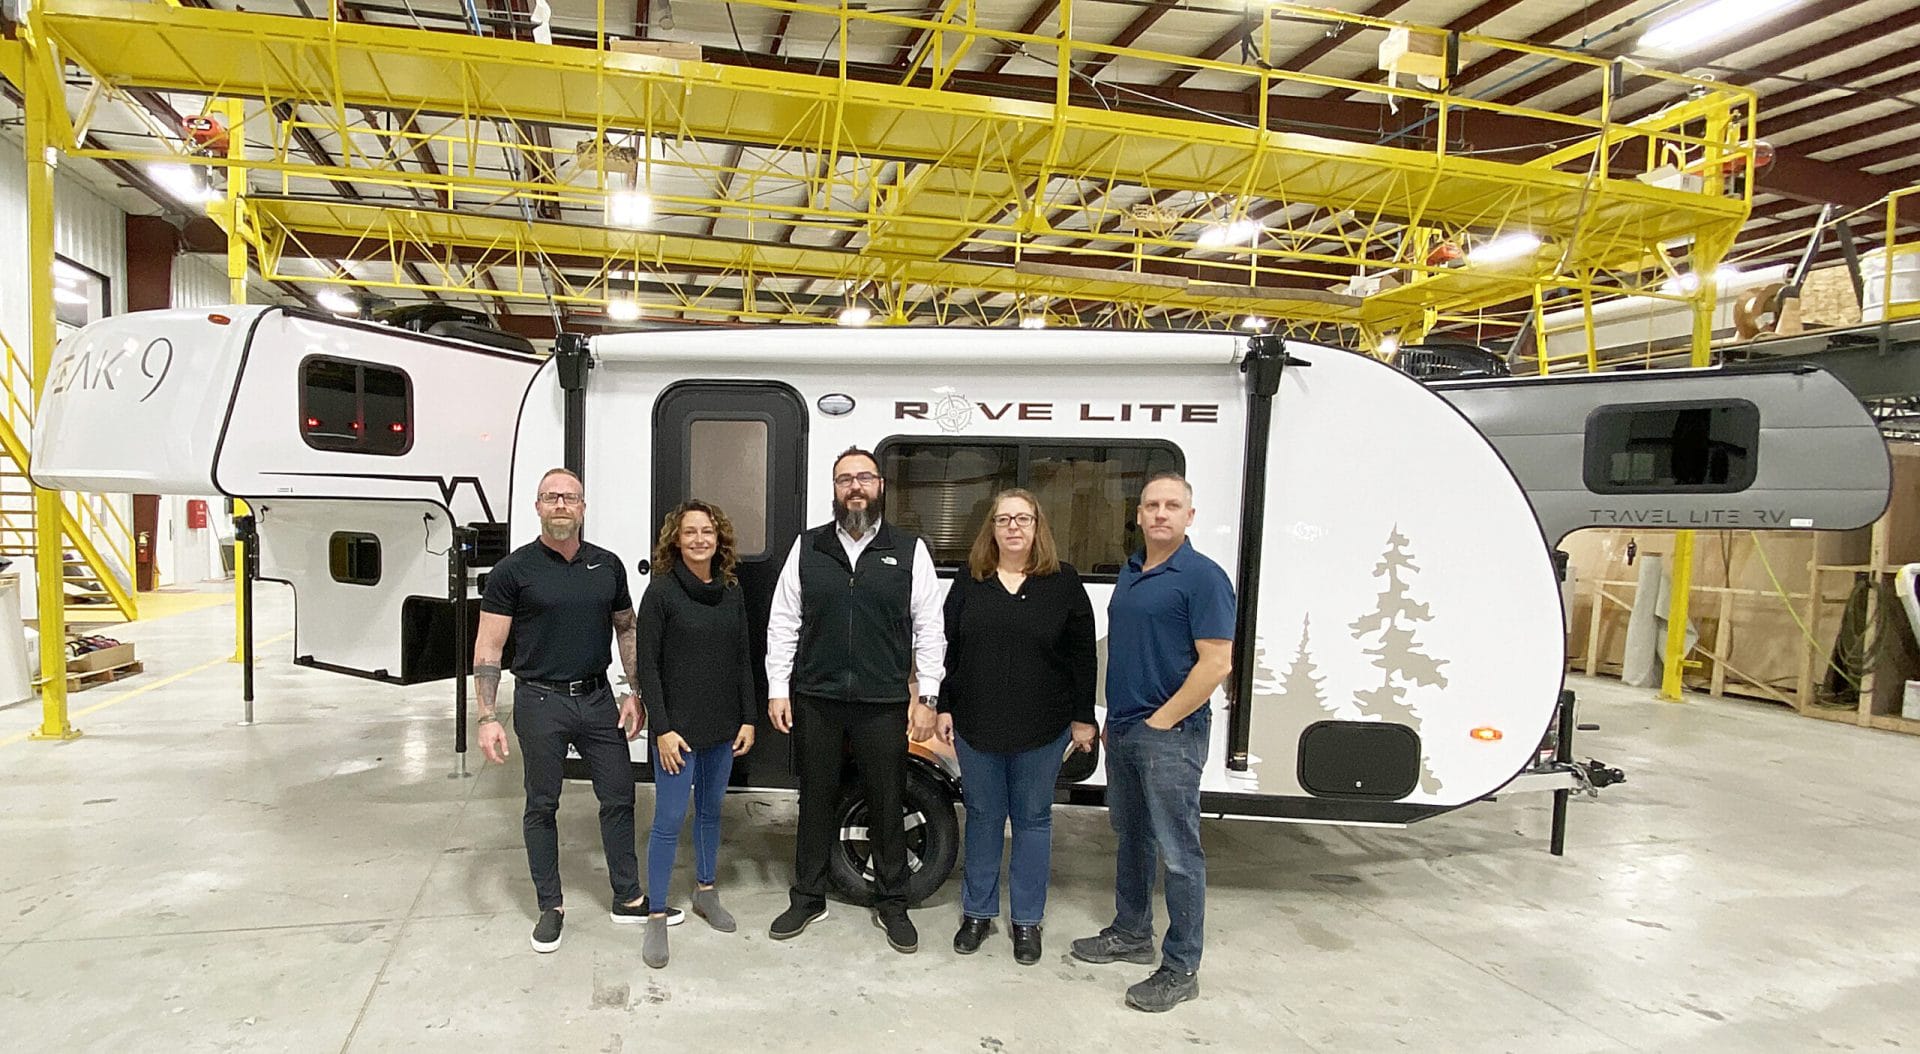 Travel Lite COO and General Manager Ryan Rebar (L) poses in front of the new Rove Lite with team members 